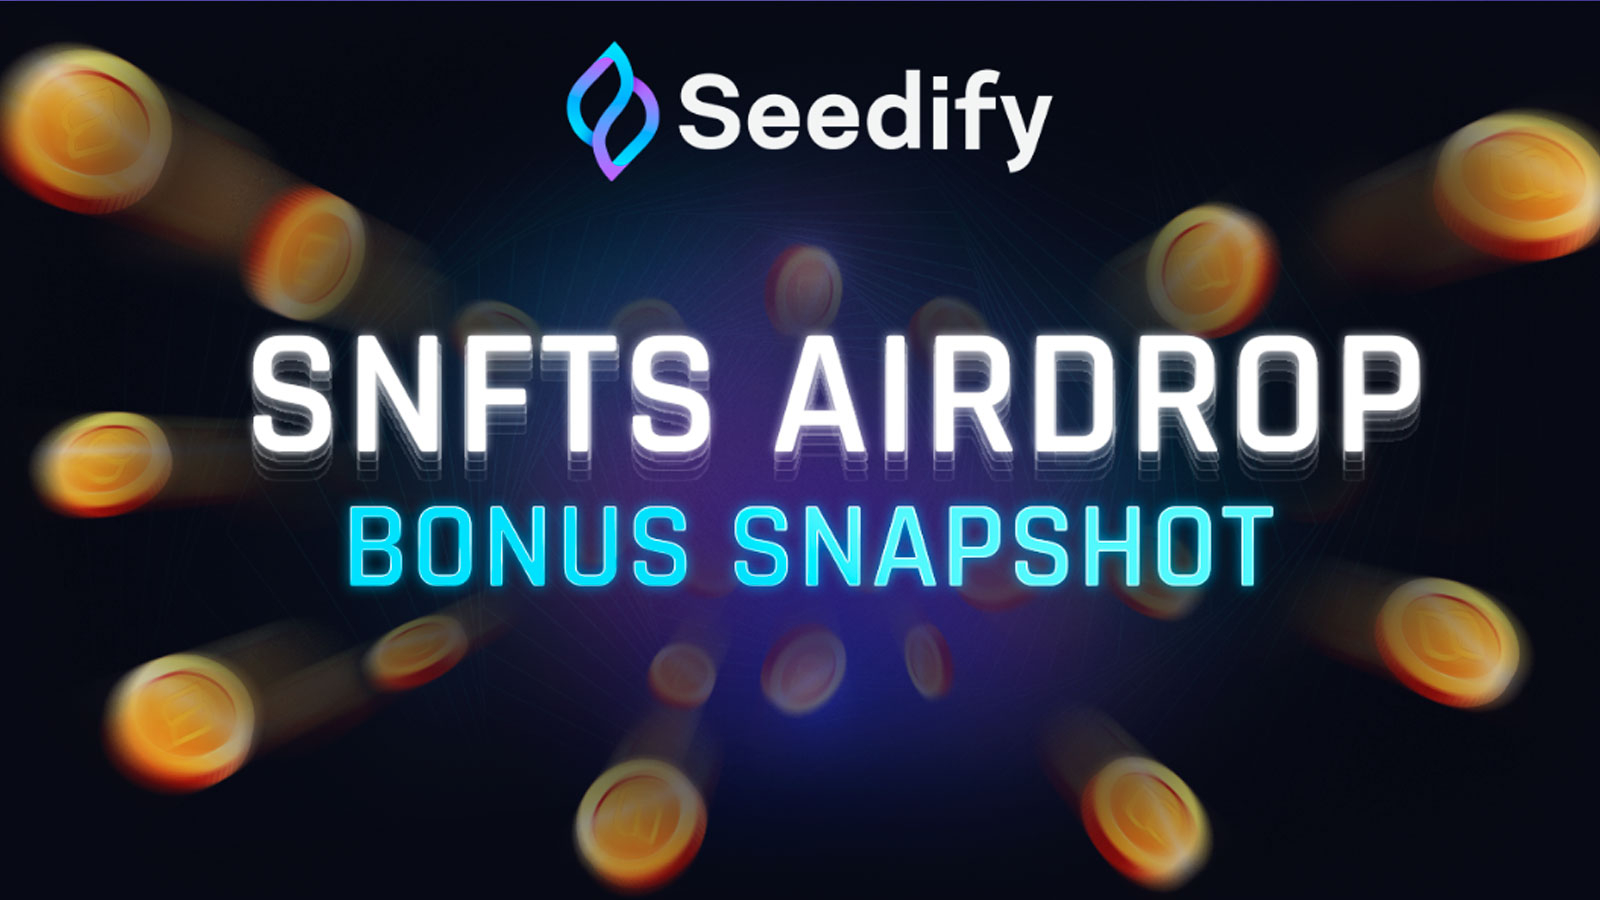 Seedify Makes a “Bonus Snapshot” Airdrop Available for Its Upcoming Token Eligibility